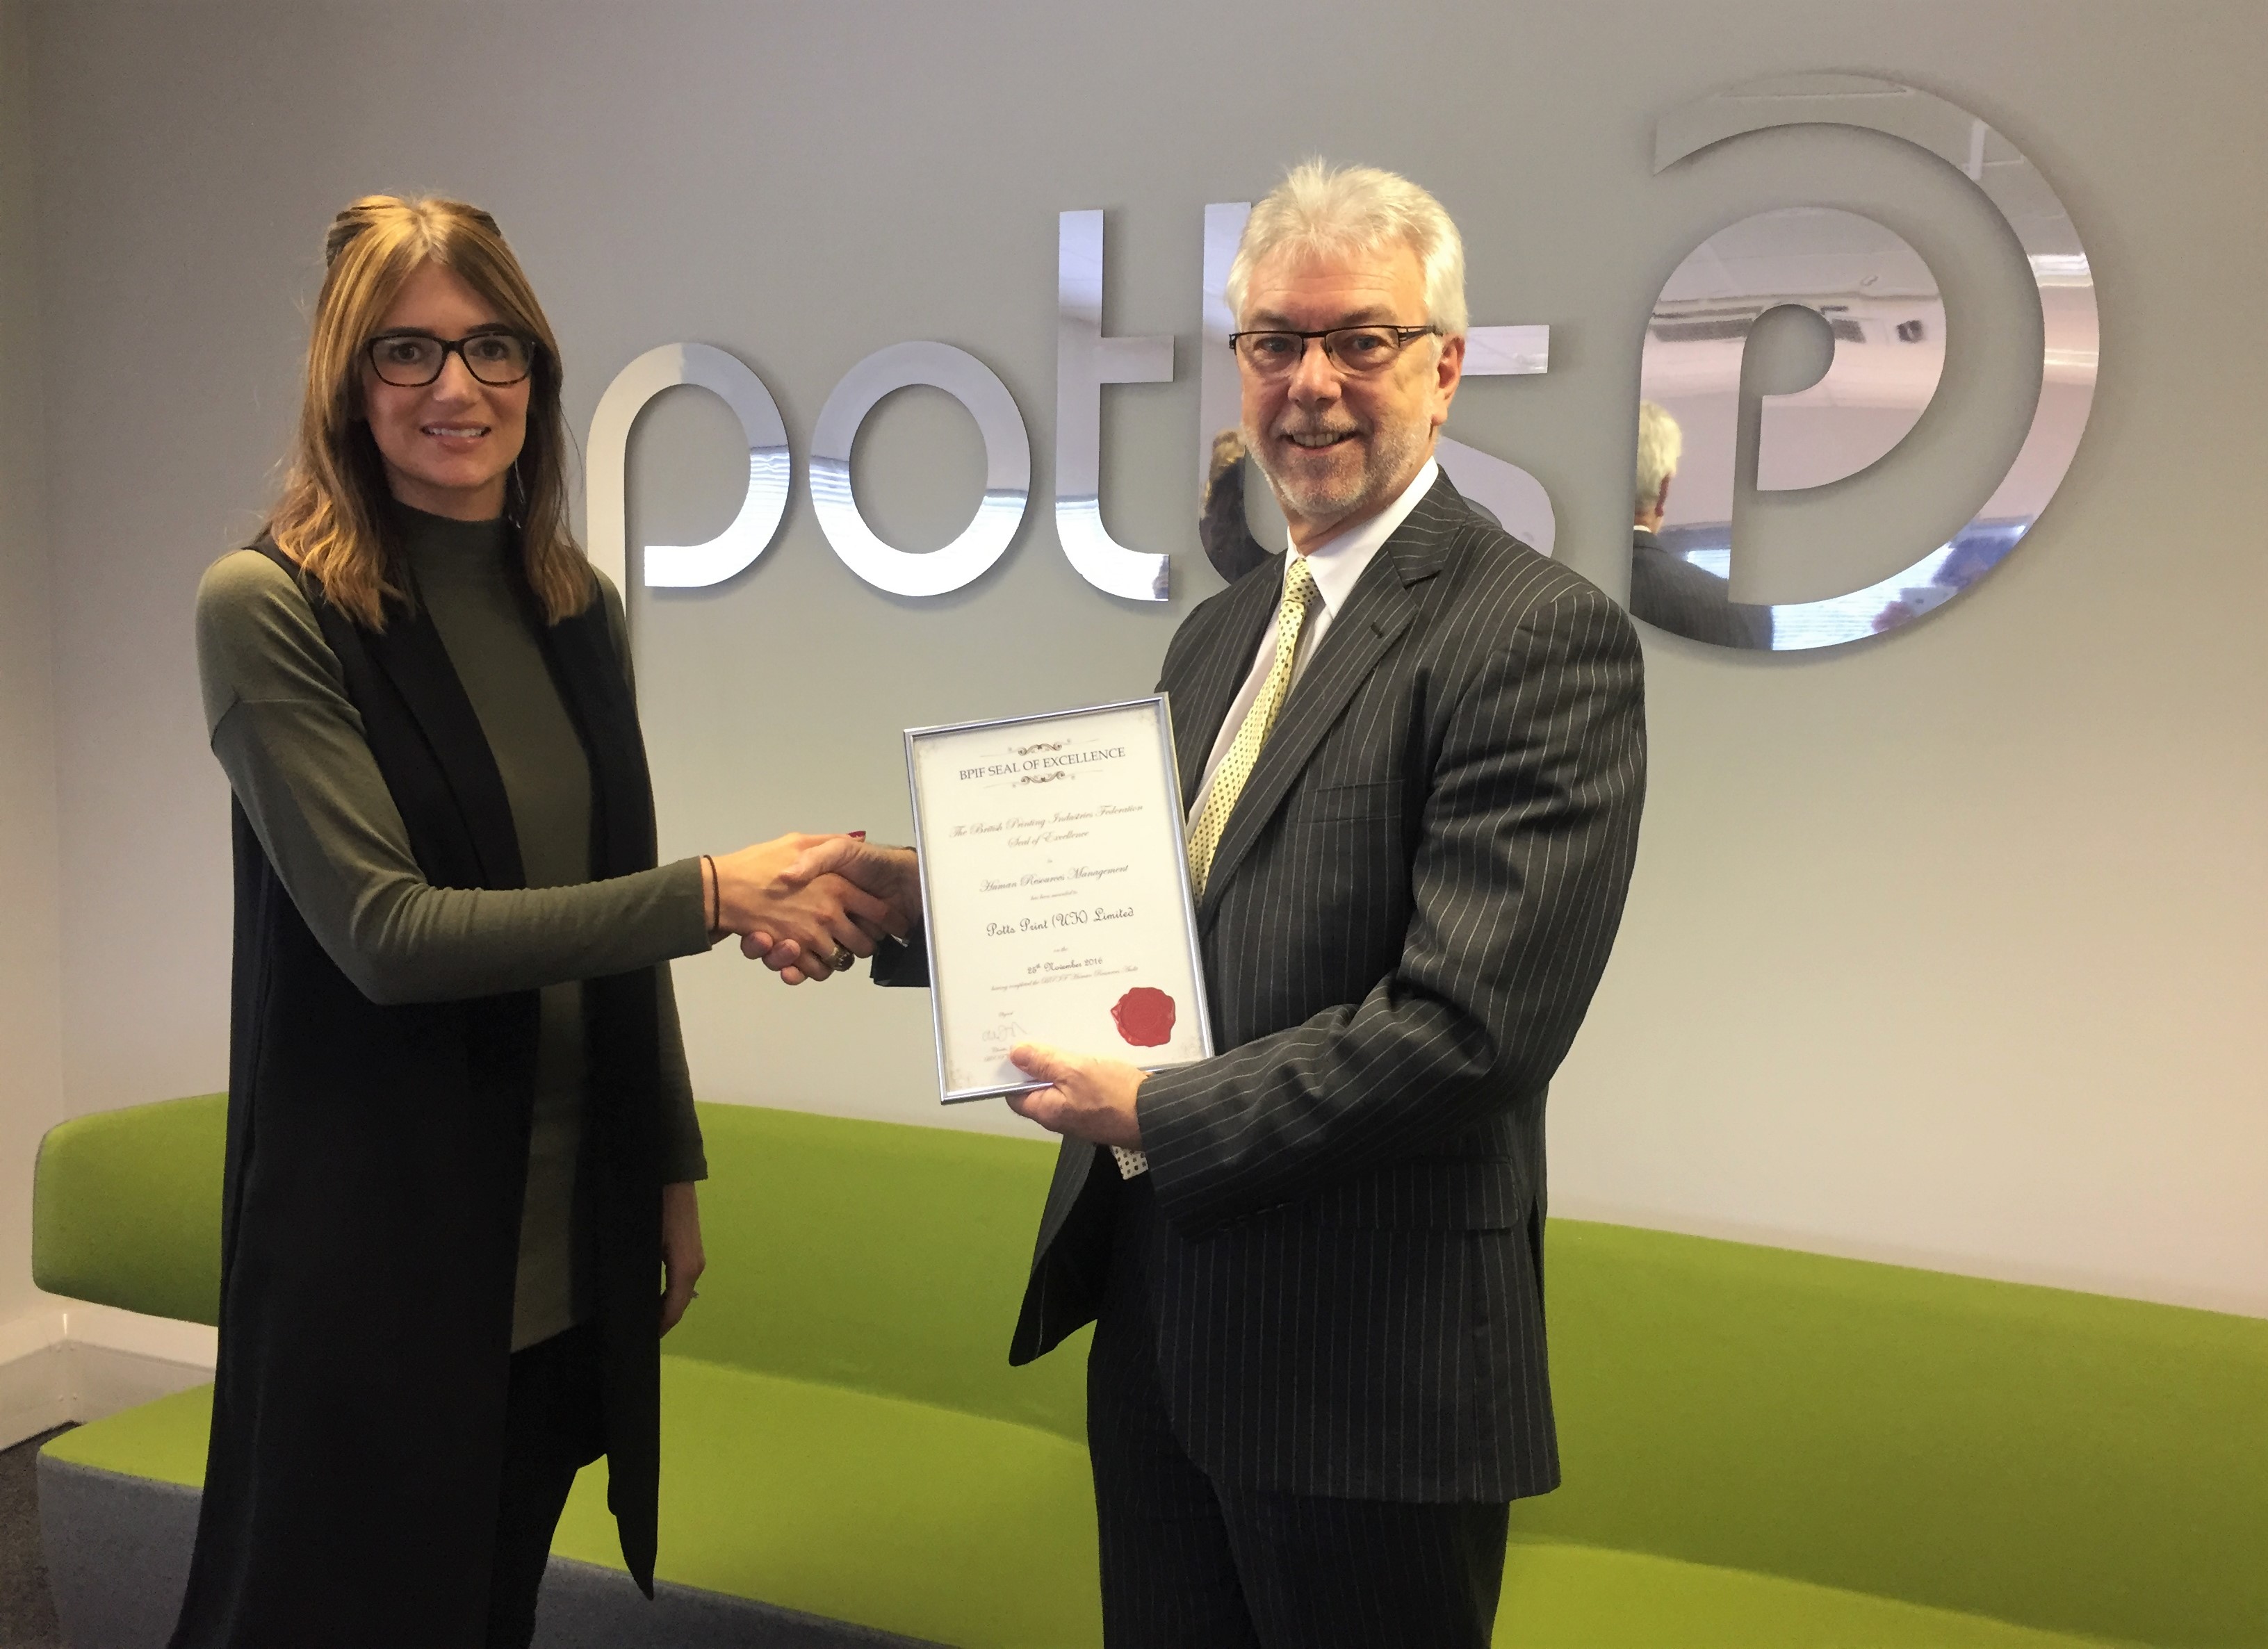 BPIF member Potts Print achieves BPIF HR Seal of Excellence